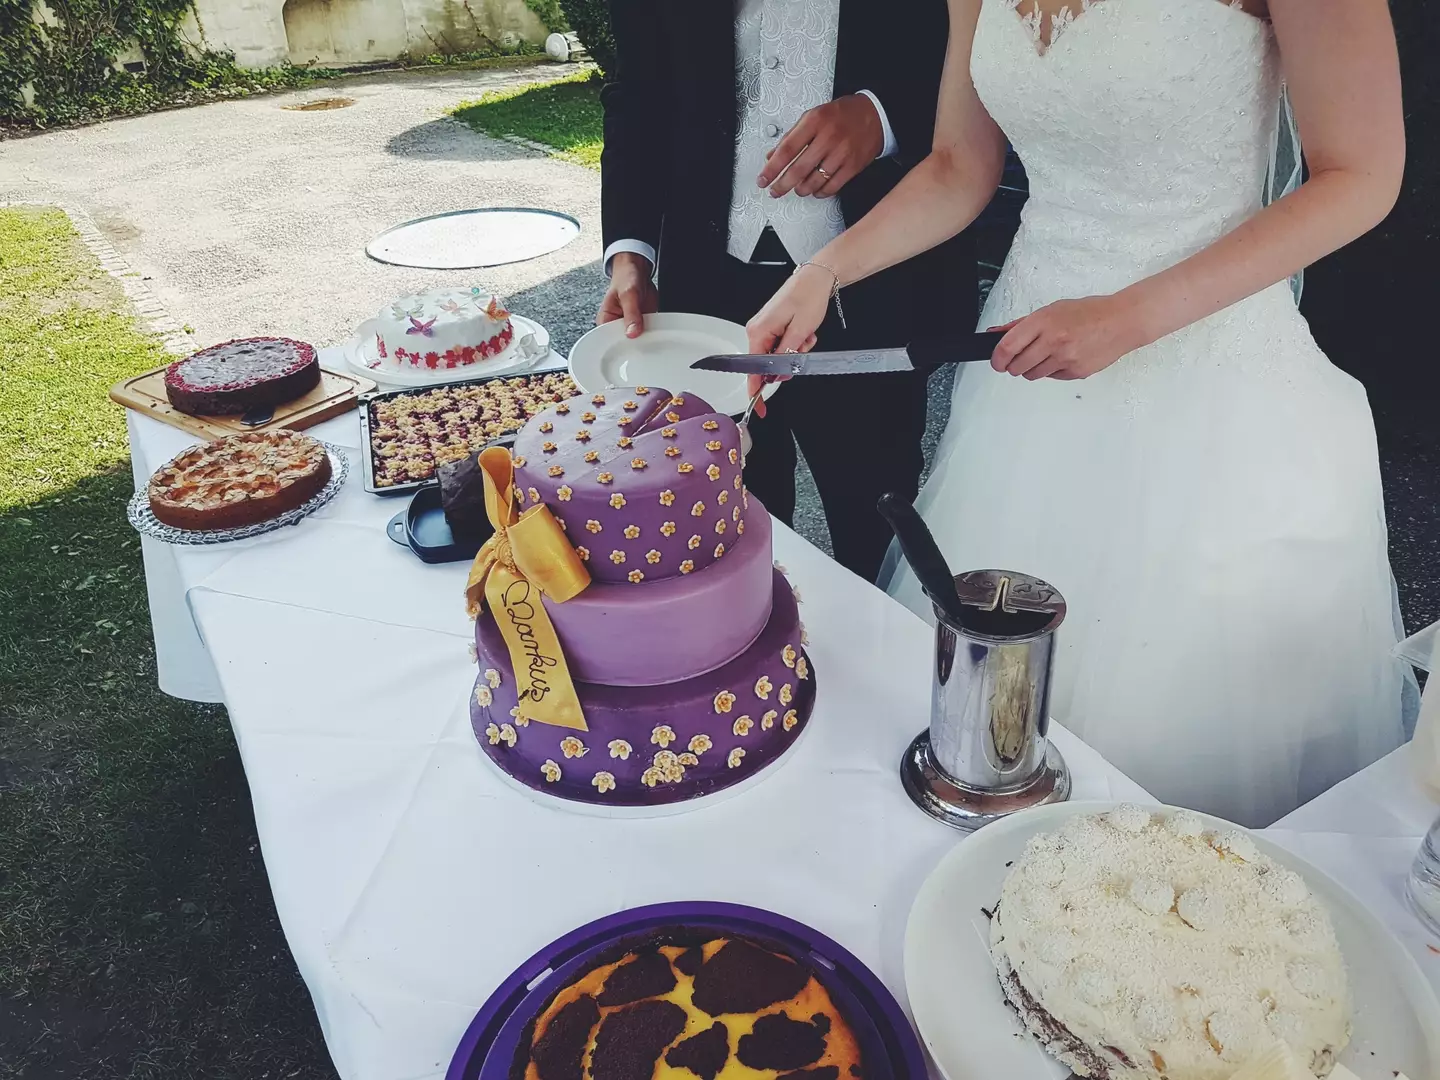 There's no denying that catering a wedding is NOT cheap.